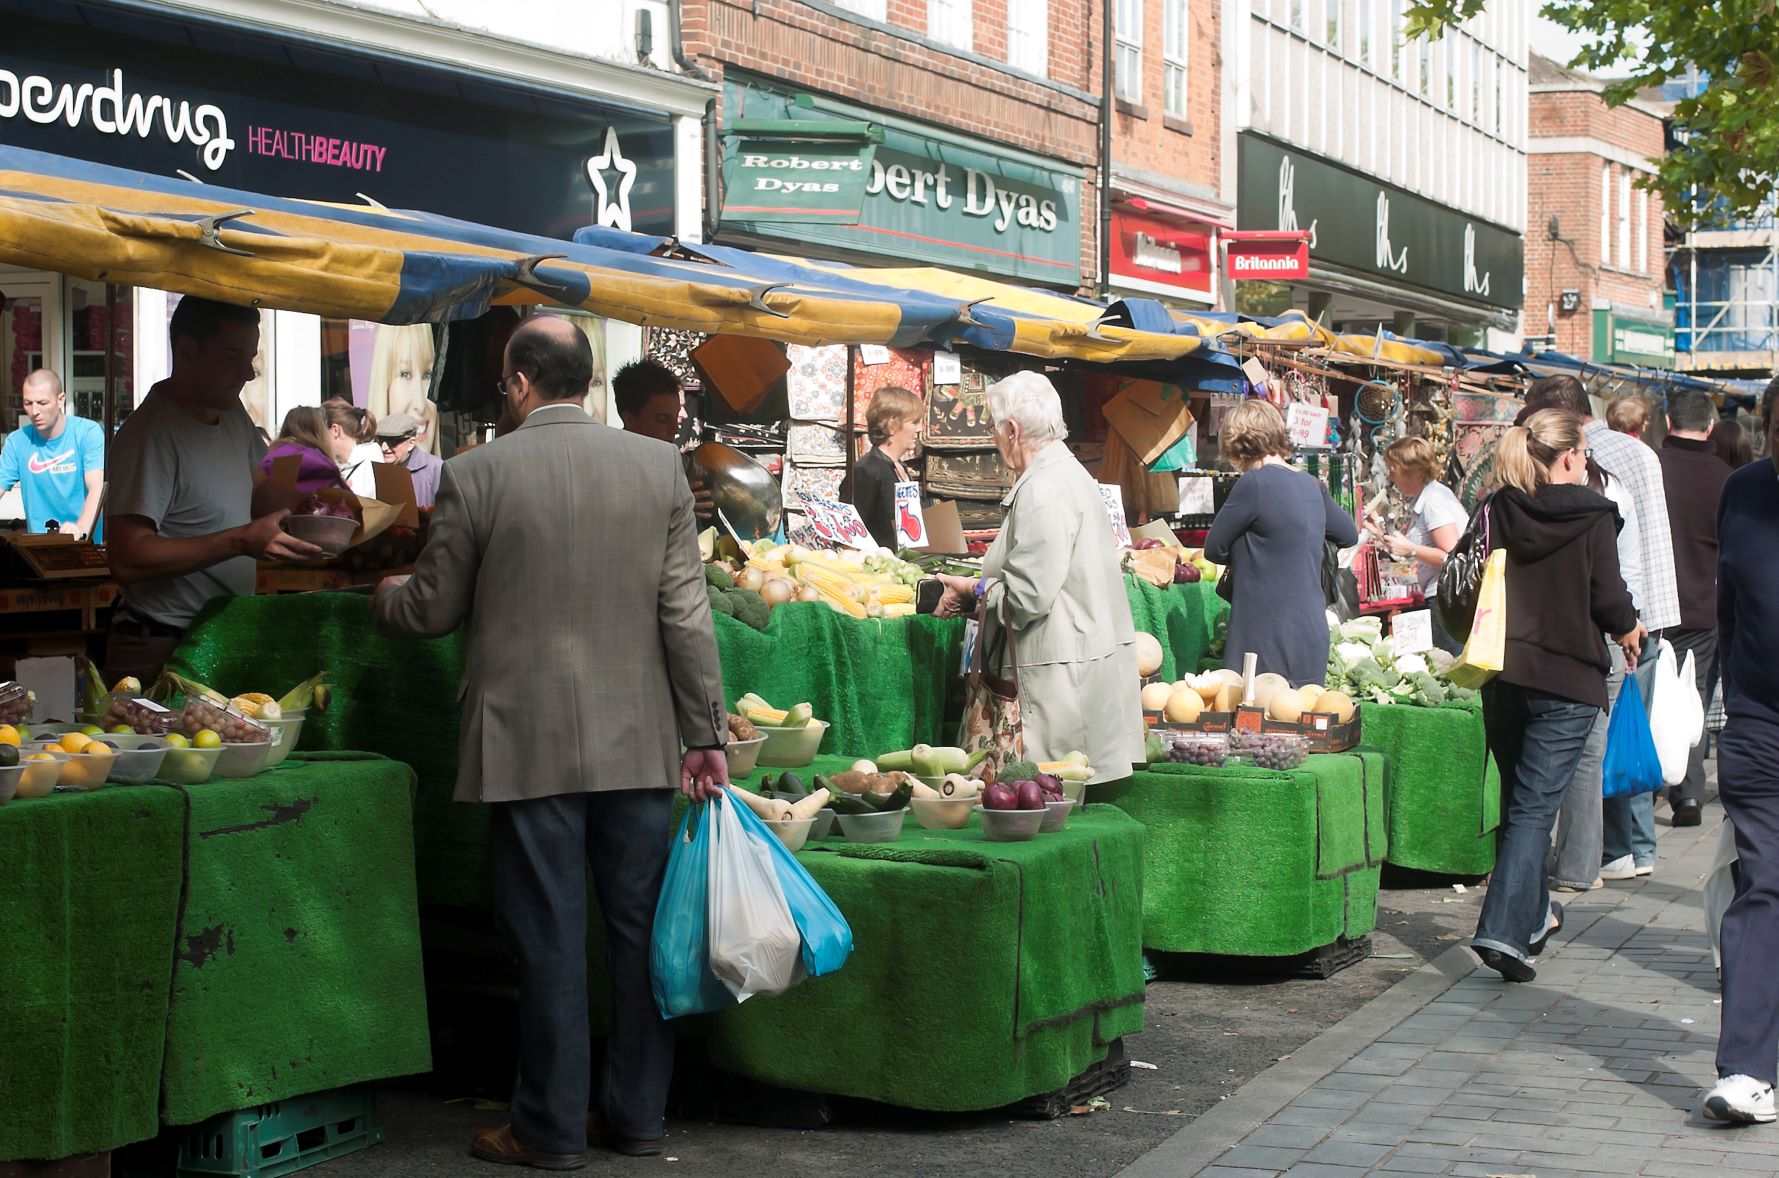 St Albans market with traditional stalls